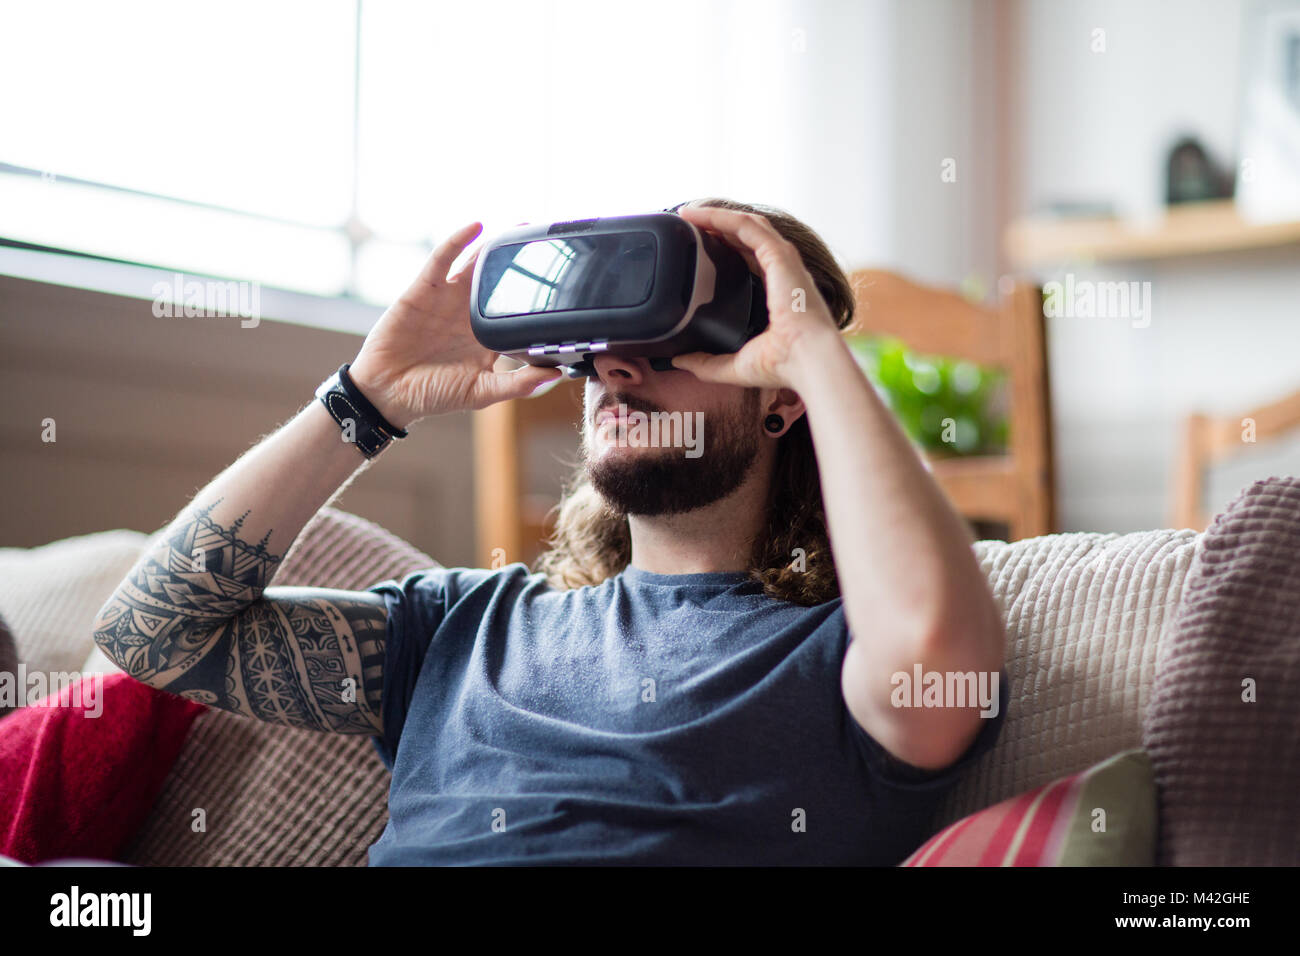 Young adult male using VR headset Stock Photo